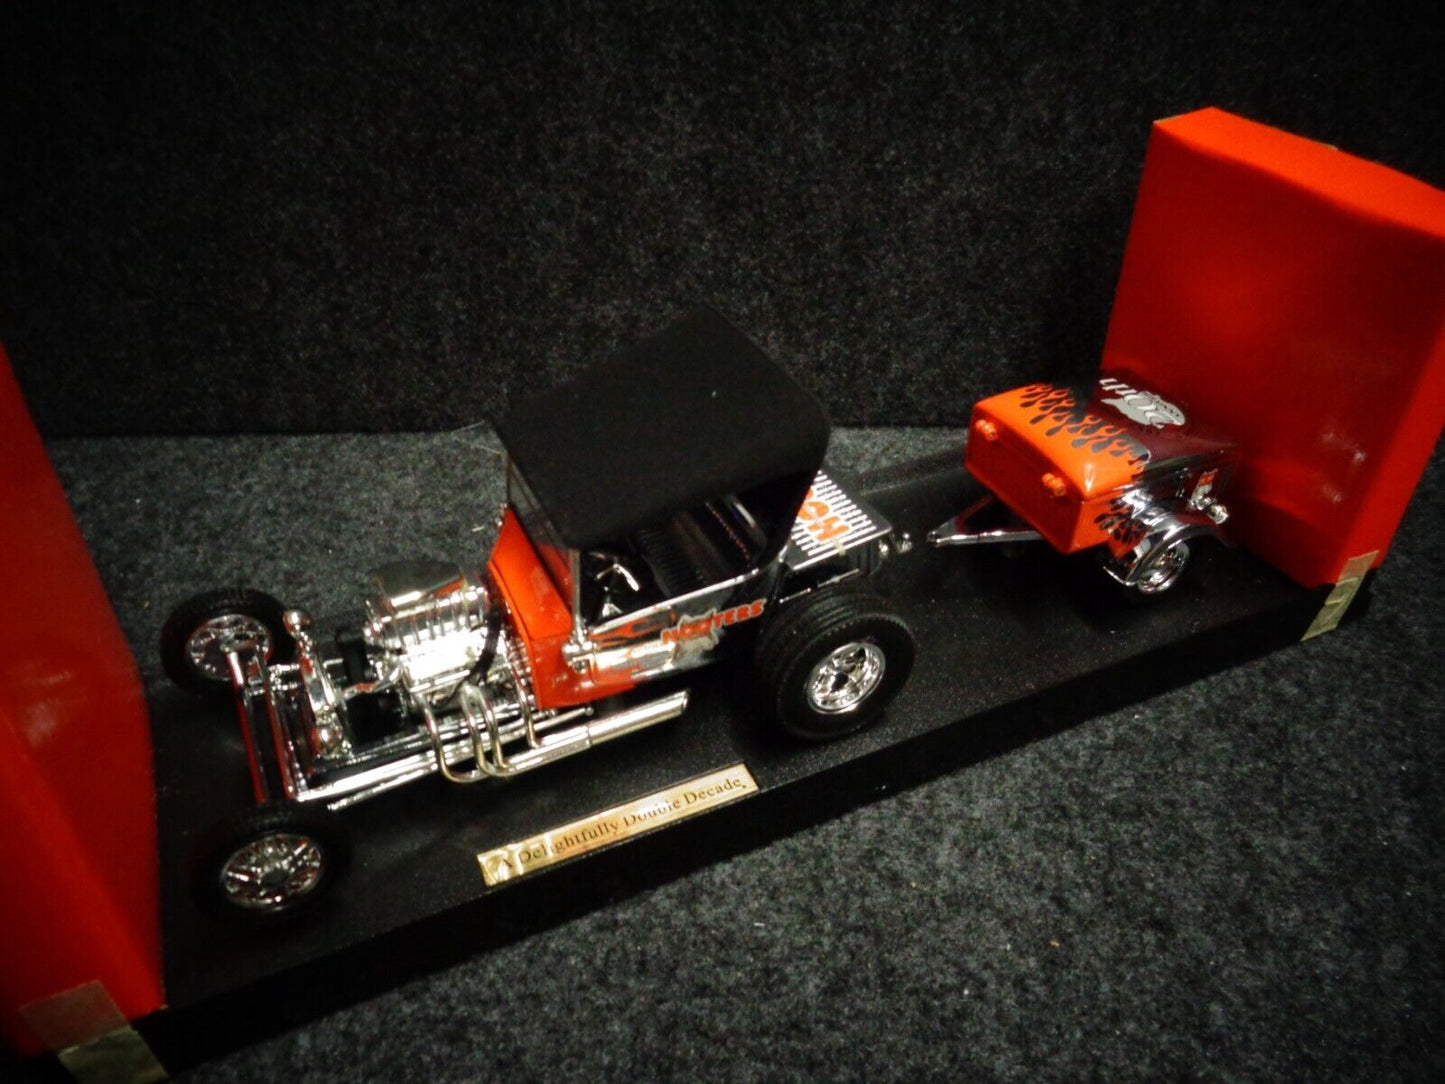 Hooters Ford Model T 'T-Bucket' Hot Rod & Trailer